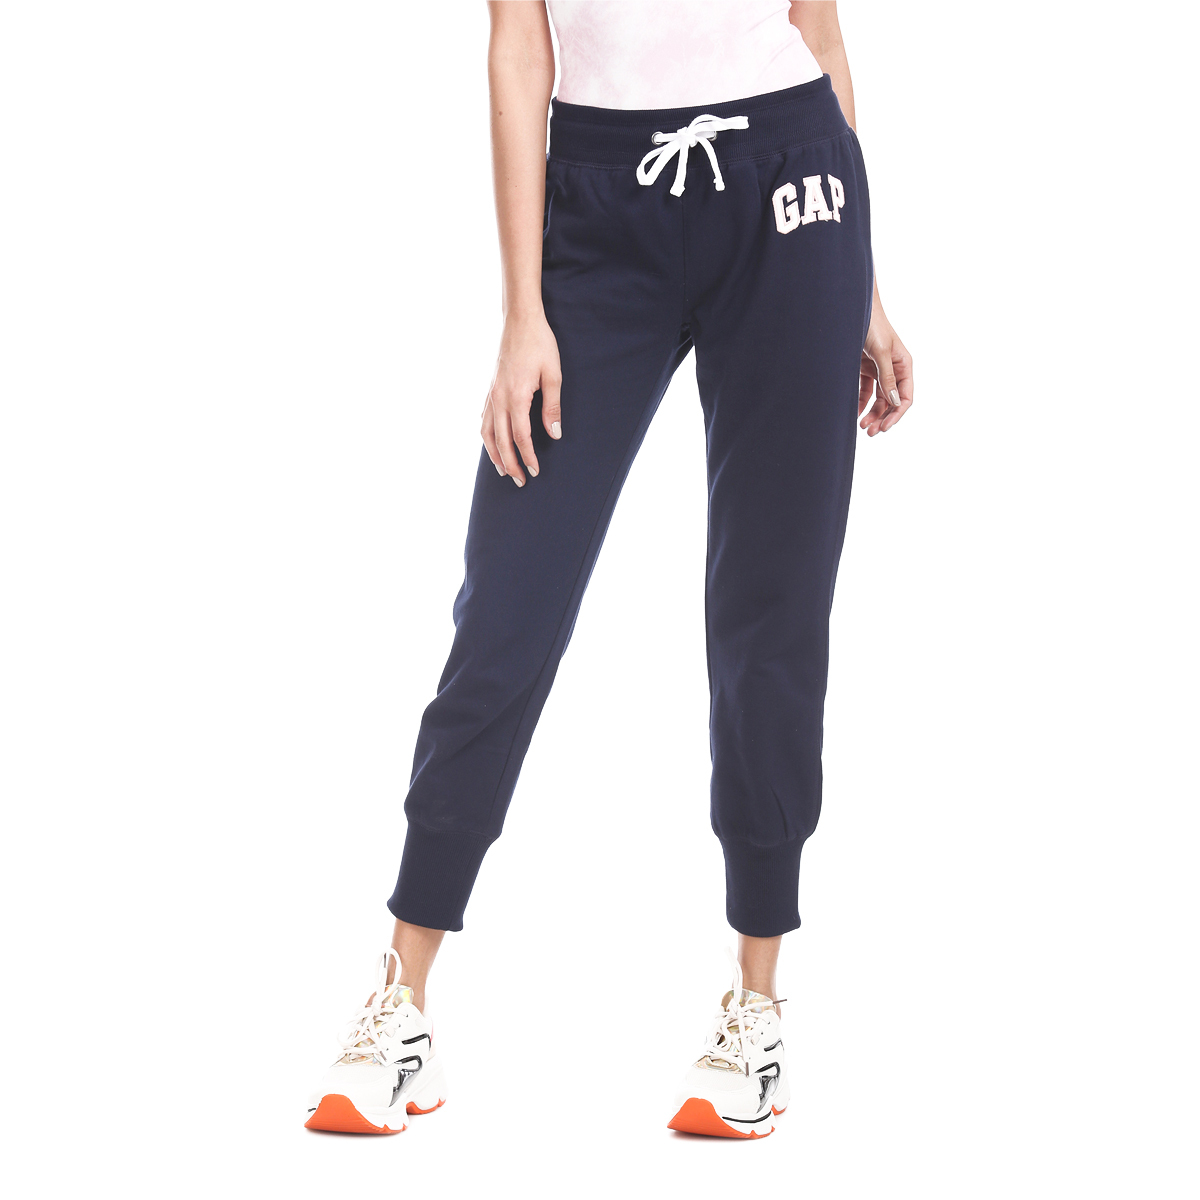 Gap Mid Rise Regular Fit Soft Cozy Fleece Knitted Solid Color Jogger Styled with Applique Worked Logo - Navy